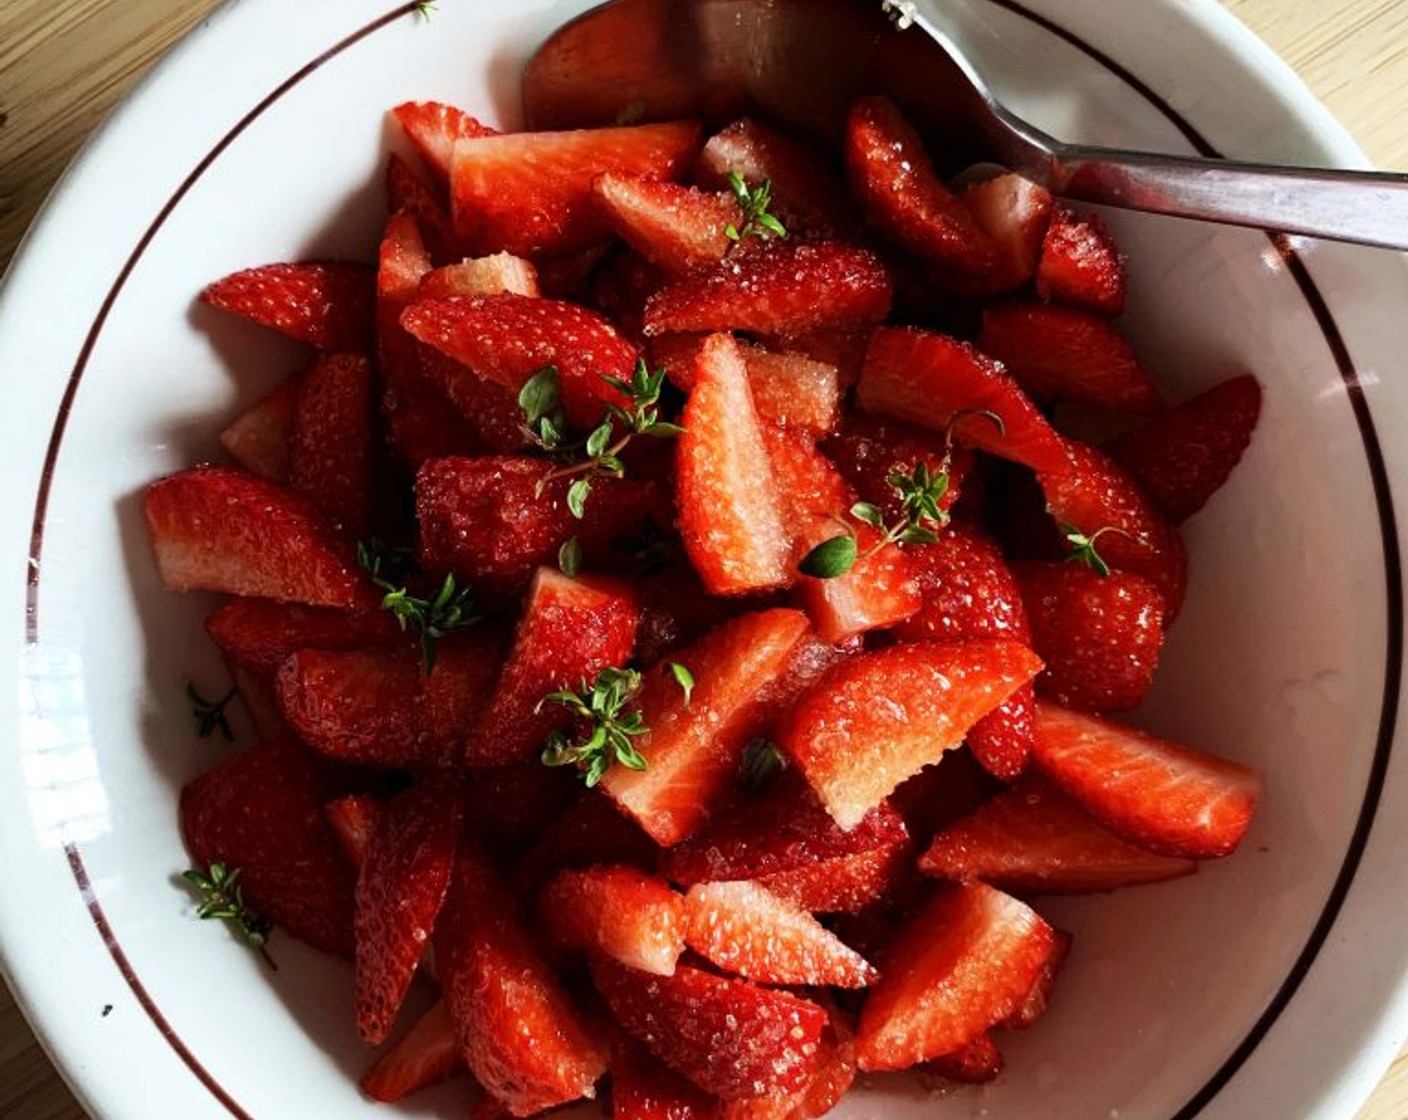 step 4 The following day, wash and slice your Fresh Strawberries (2 cups), mix them with the juice of half a Lemon (1/2), Cane Sugar (1 Tbsp), and some Fresh Thyme Leaves (to taste), Set aside.